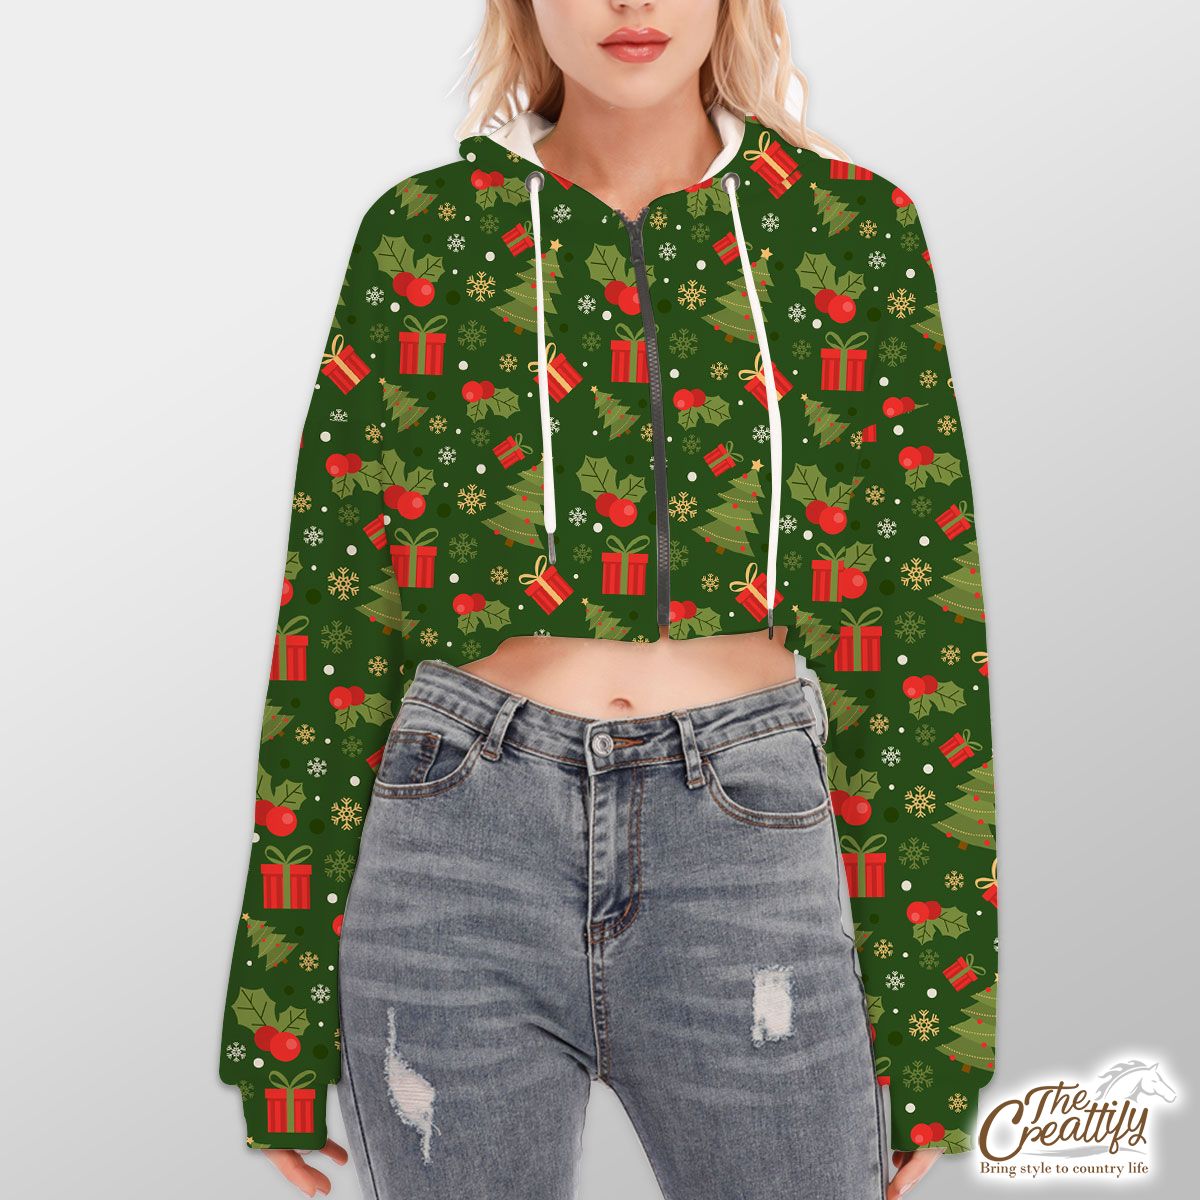 Christmas Tree With Holly Leaf And Presents Hoodie With Zipper Closure